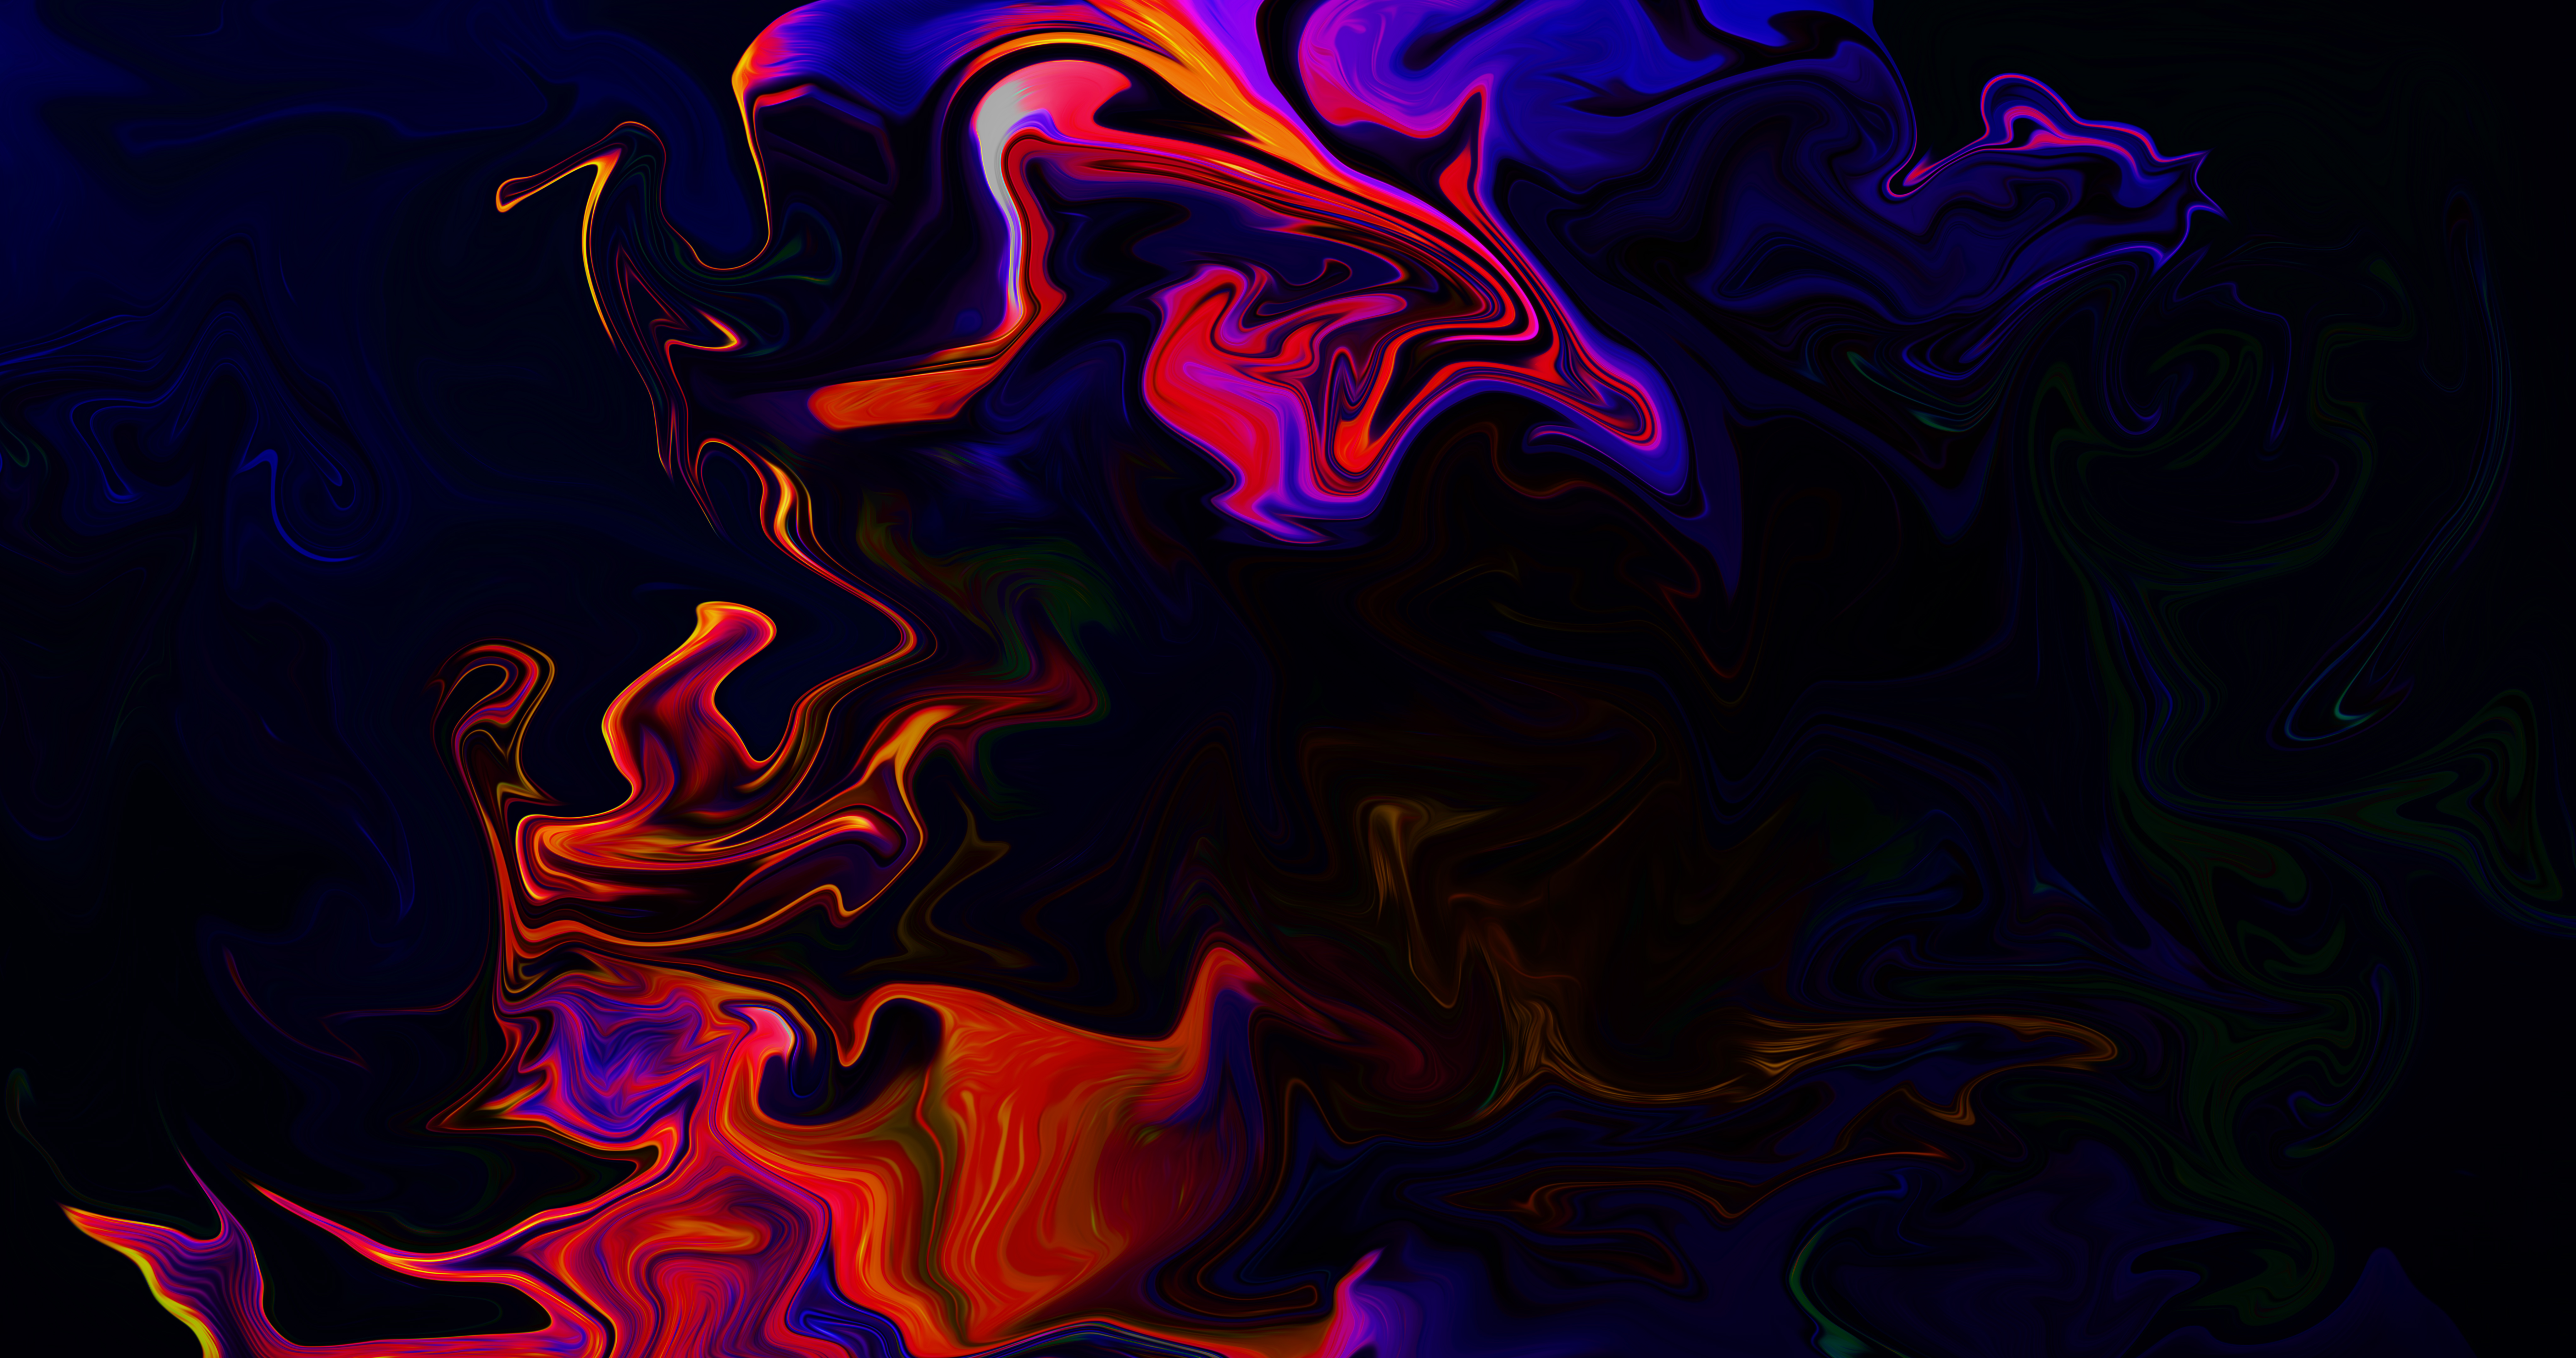 Abstract Shapes Colorful Fluid Liquid Artwork Digital Art Paint Brushes Neon Red Blue Dark 8 K 8192x4320